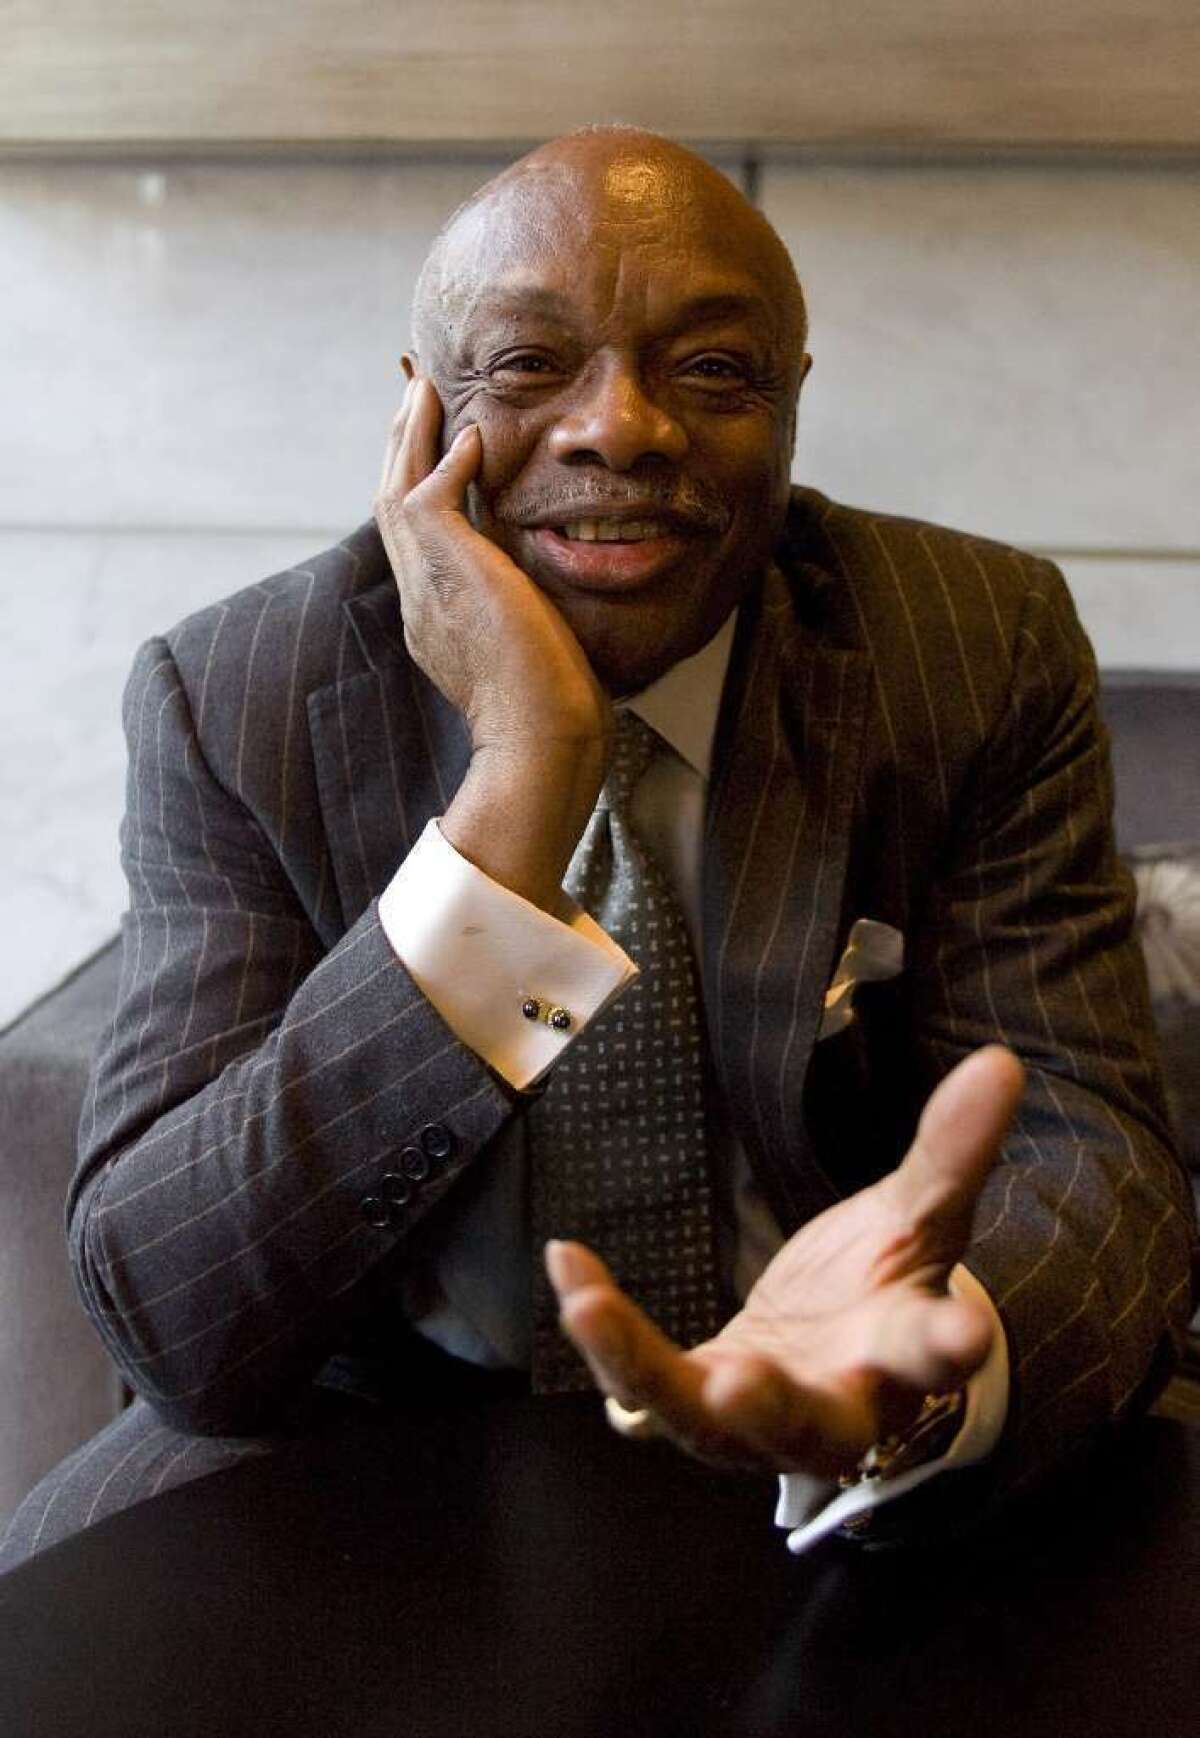 The California Legislature has approved a joint resolution calling for a span of the San Francisco-Oakland Bay Bridge to be named after former longtime Assembly Speaker and ex-San Francisco Mayor Willie Brown.